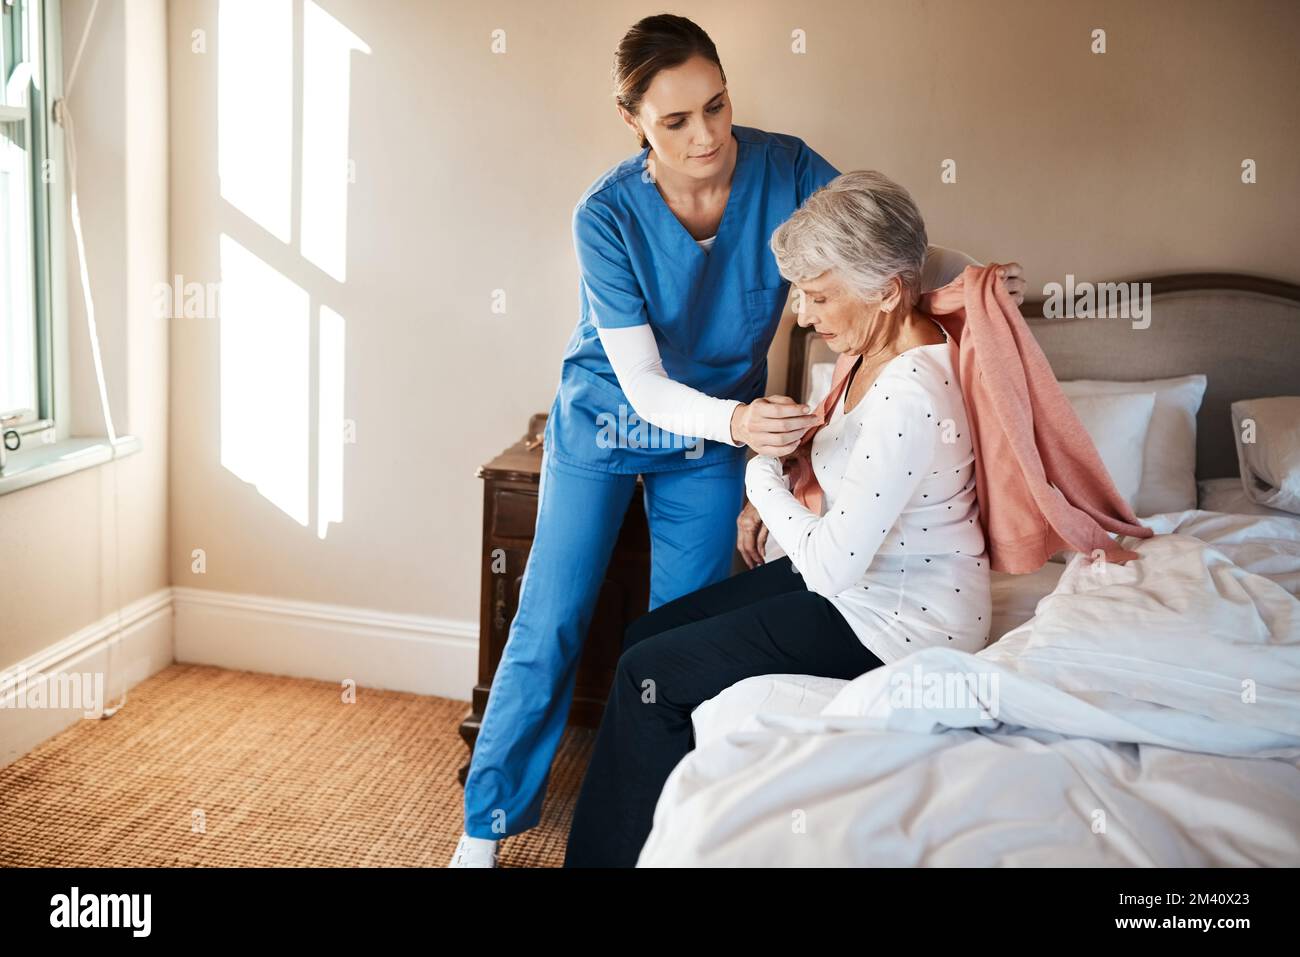 One day well all need a bit of extra help. a young nurse helping a senior woman get dressed in her bedroom at a nursing home. Stock Photo